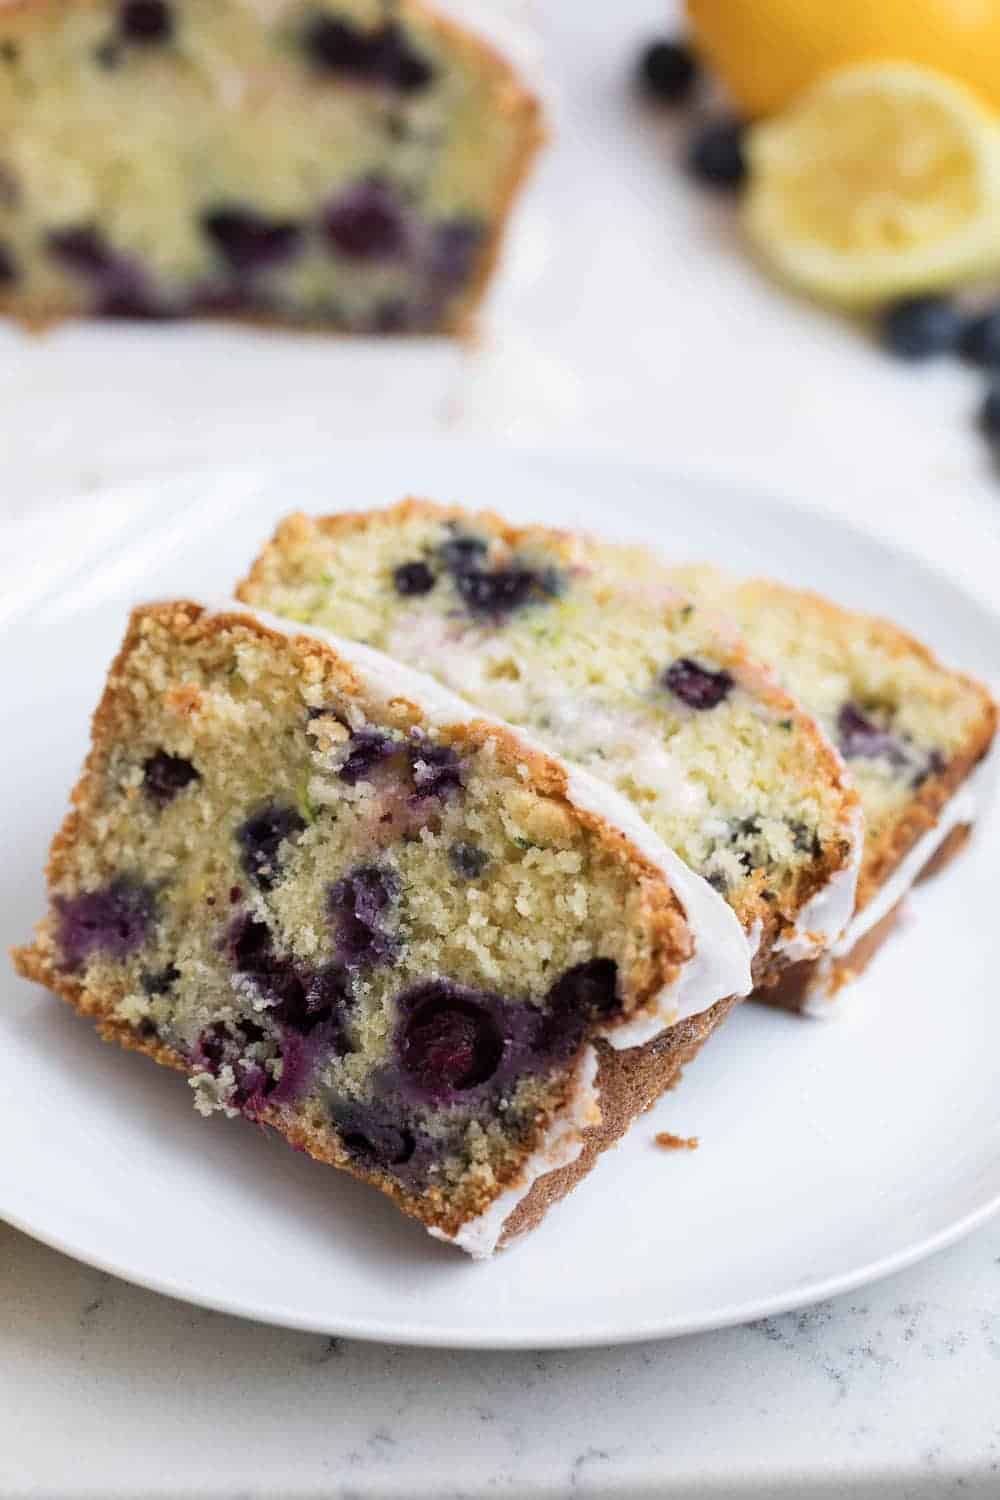 Slices of blueberry zucchini bread on a white plate.